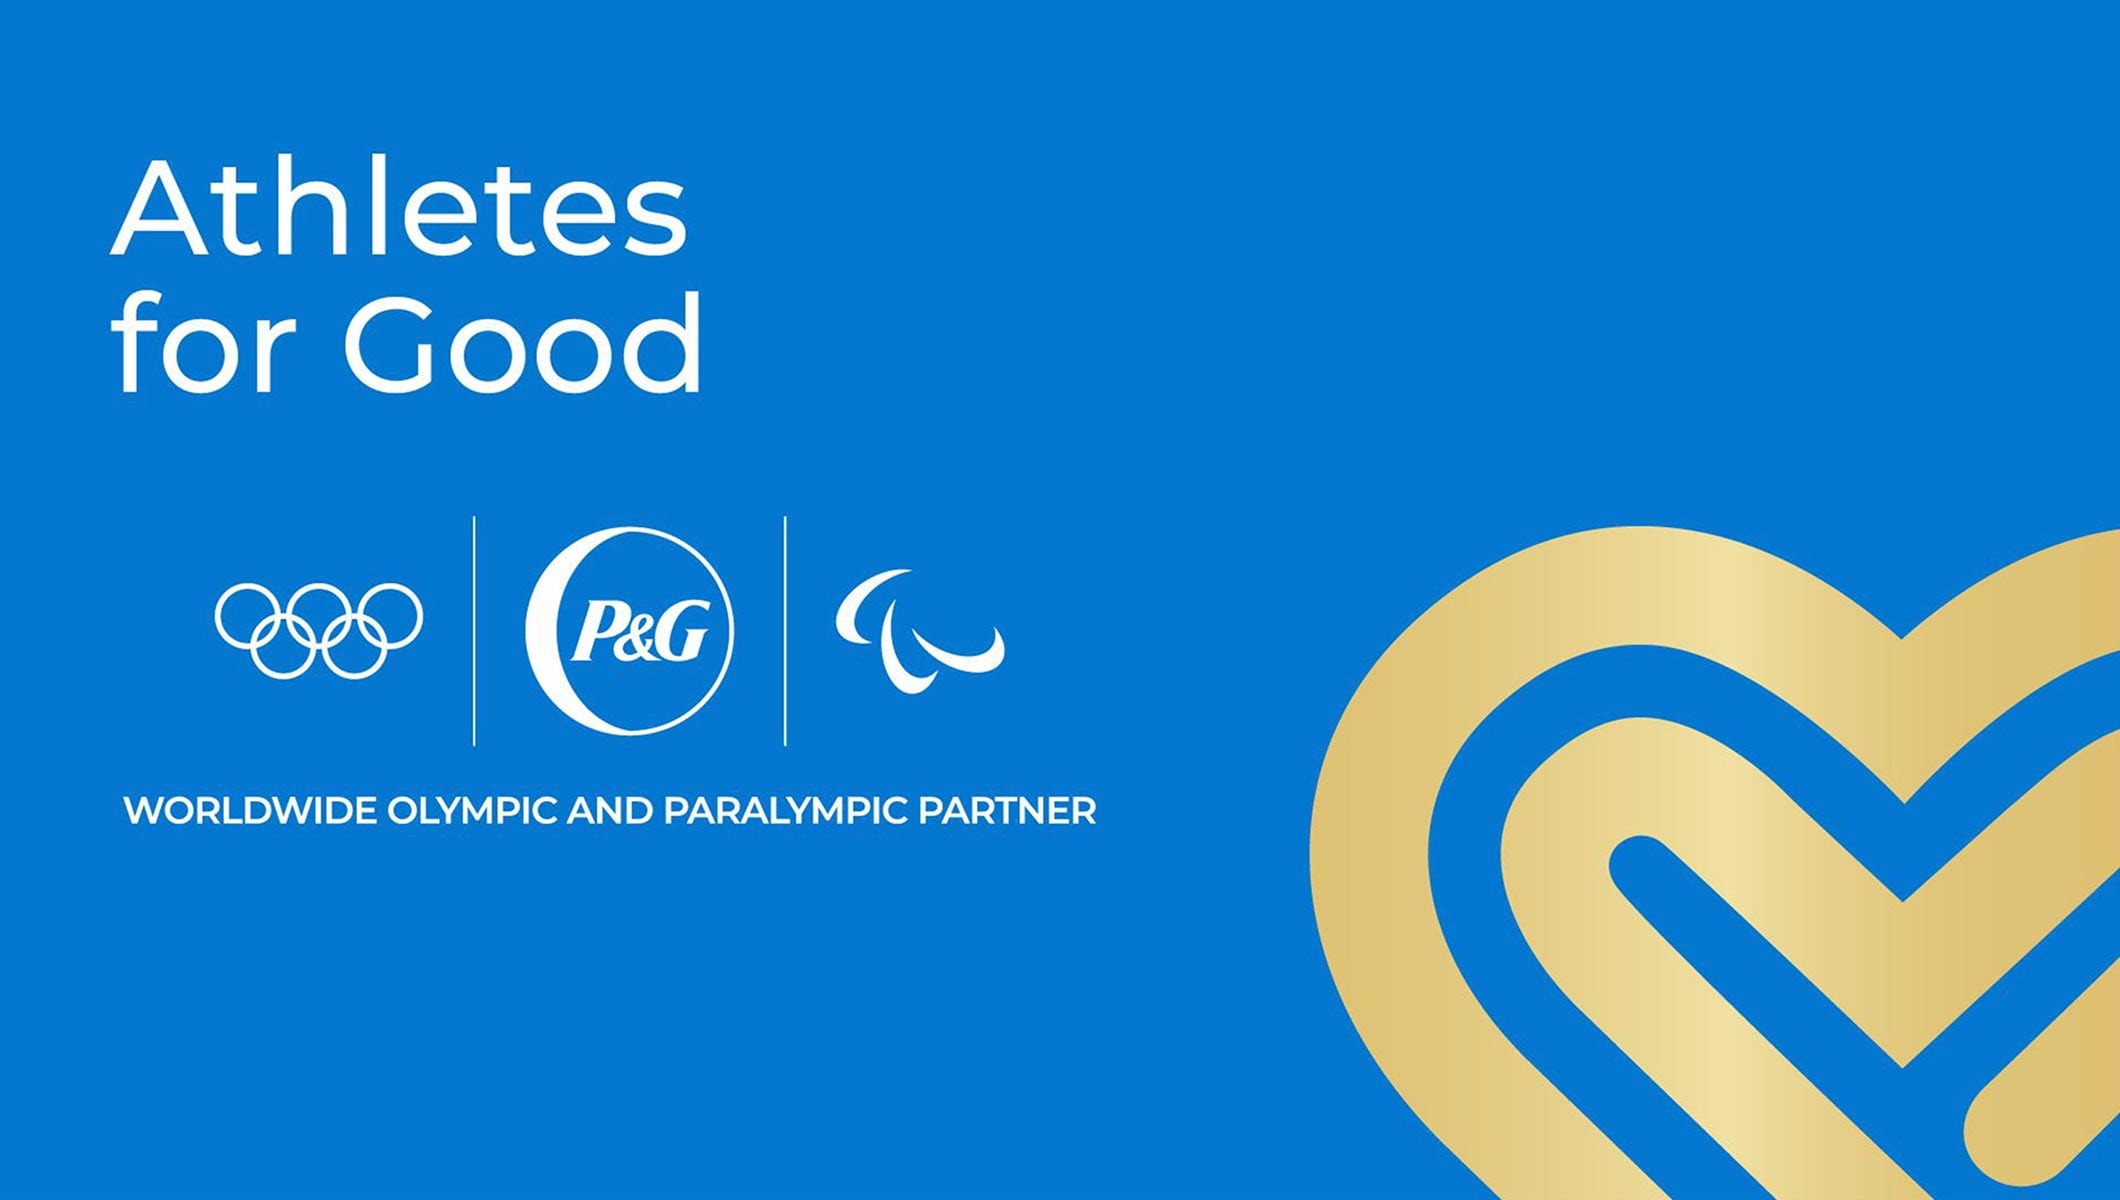 P&G Athletes for Good 